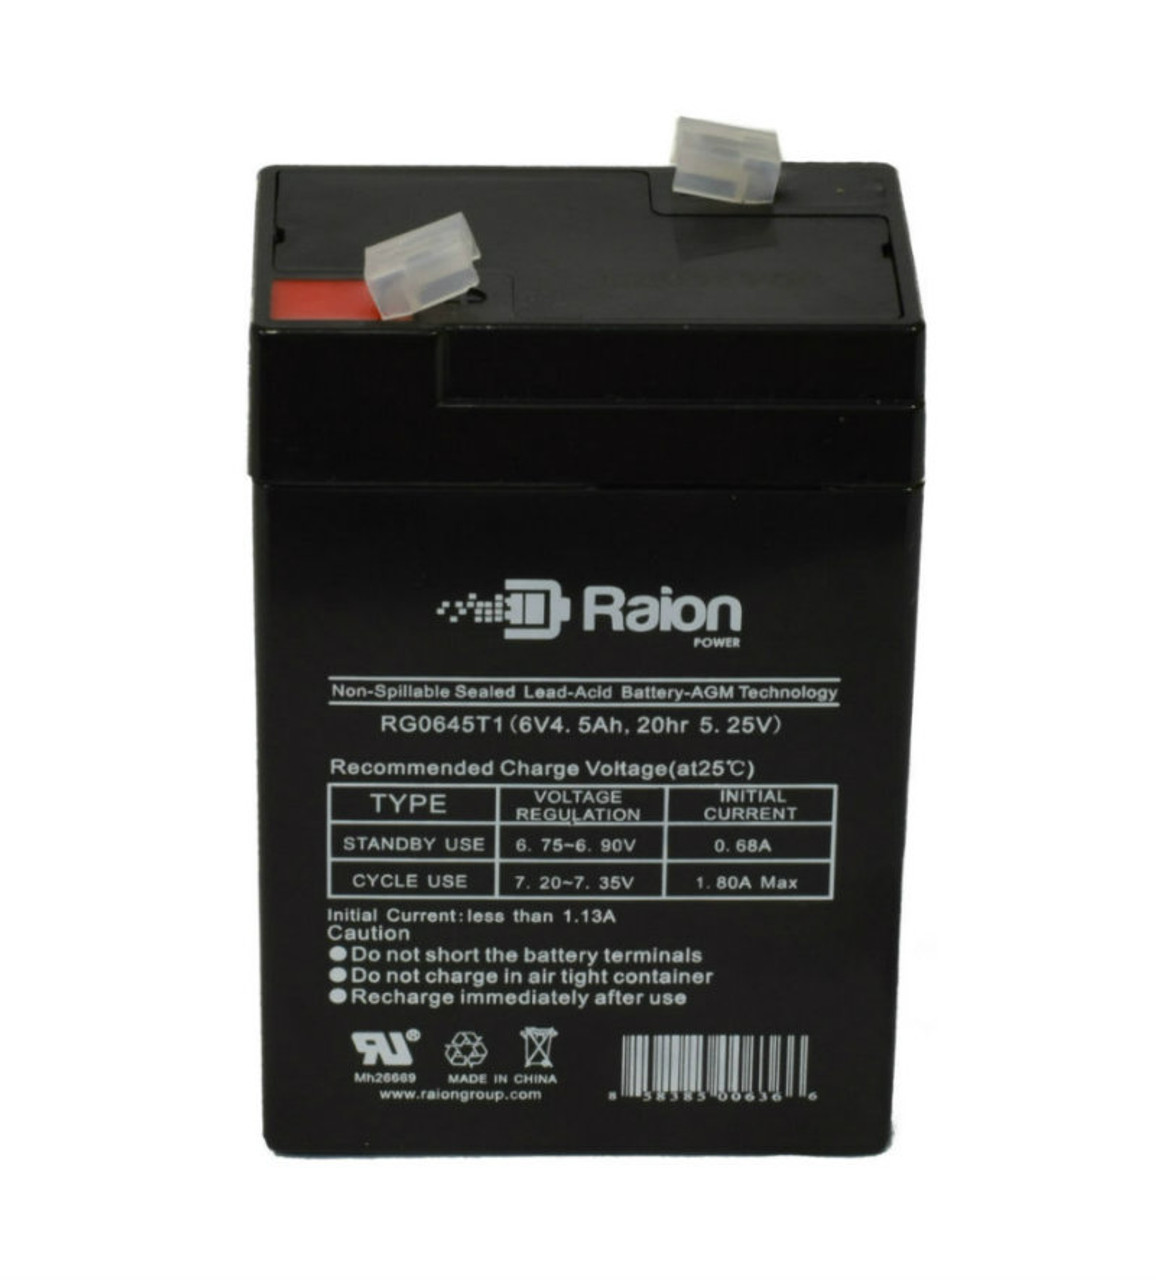 Raion Power RG0645T1 Replacement Battery Cartridge for New Power NS6-4.5H